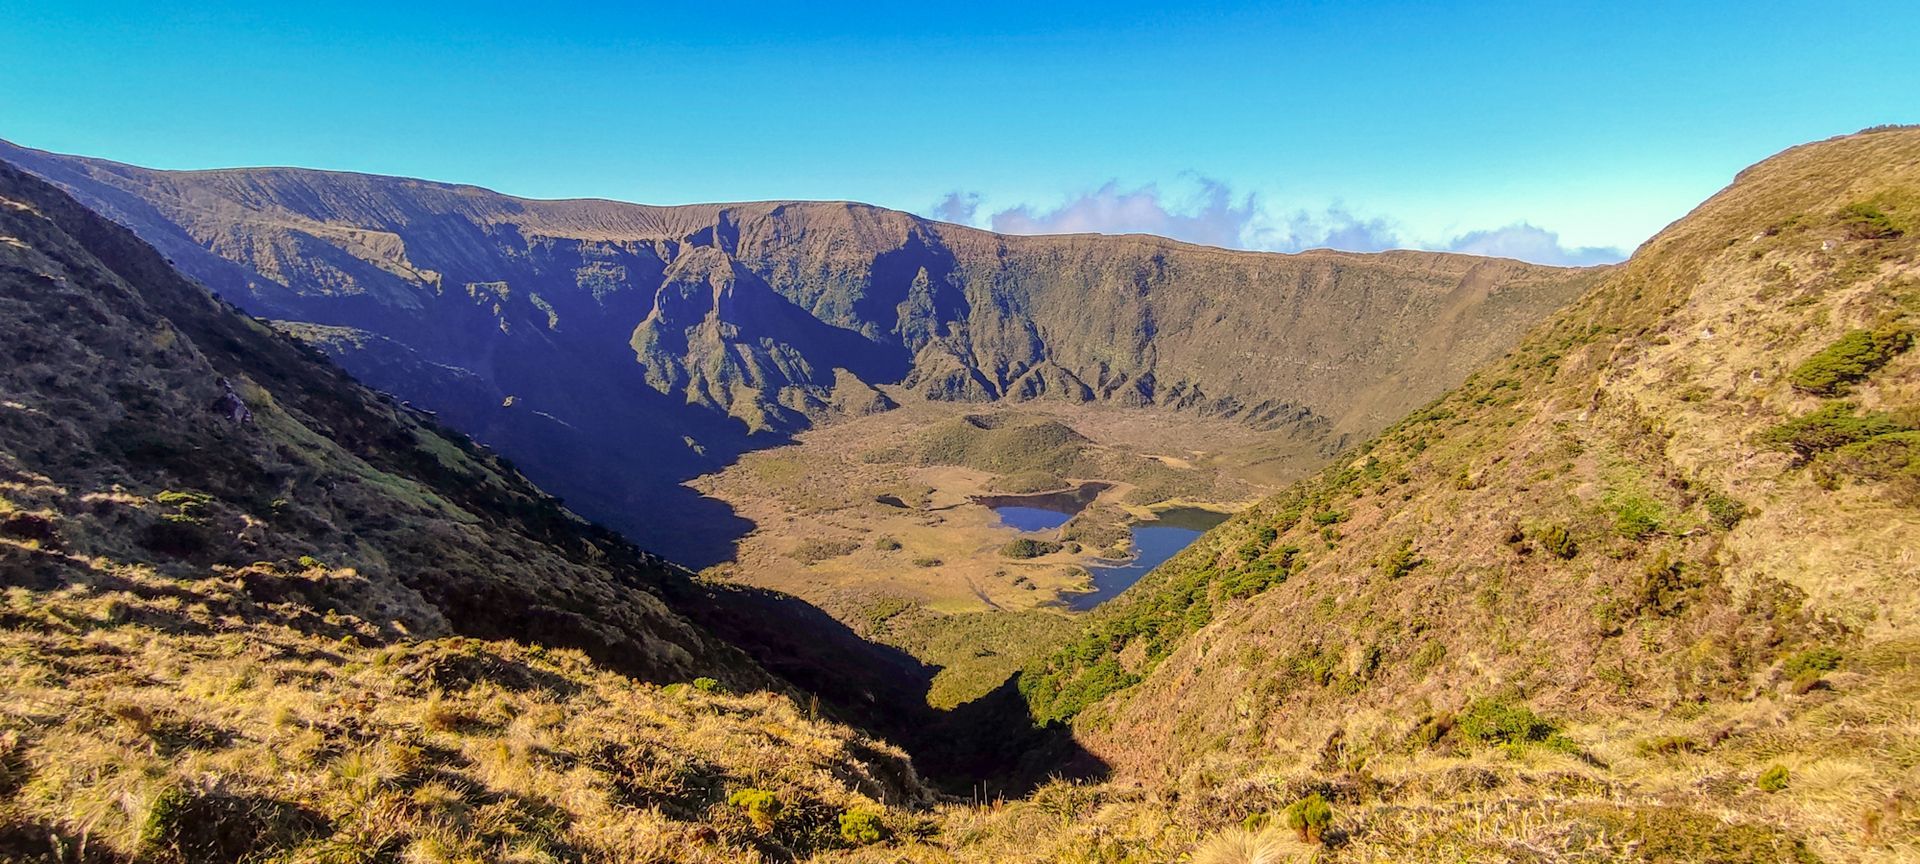 Visit the Caldeira do Faial on our Excursions, Tours and Half-Day Guided Visits on the island of Faial Azores.